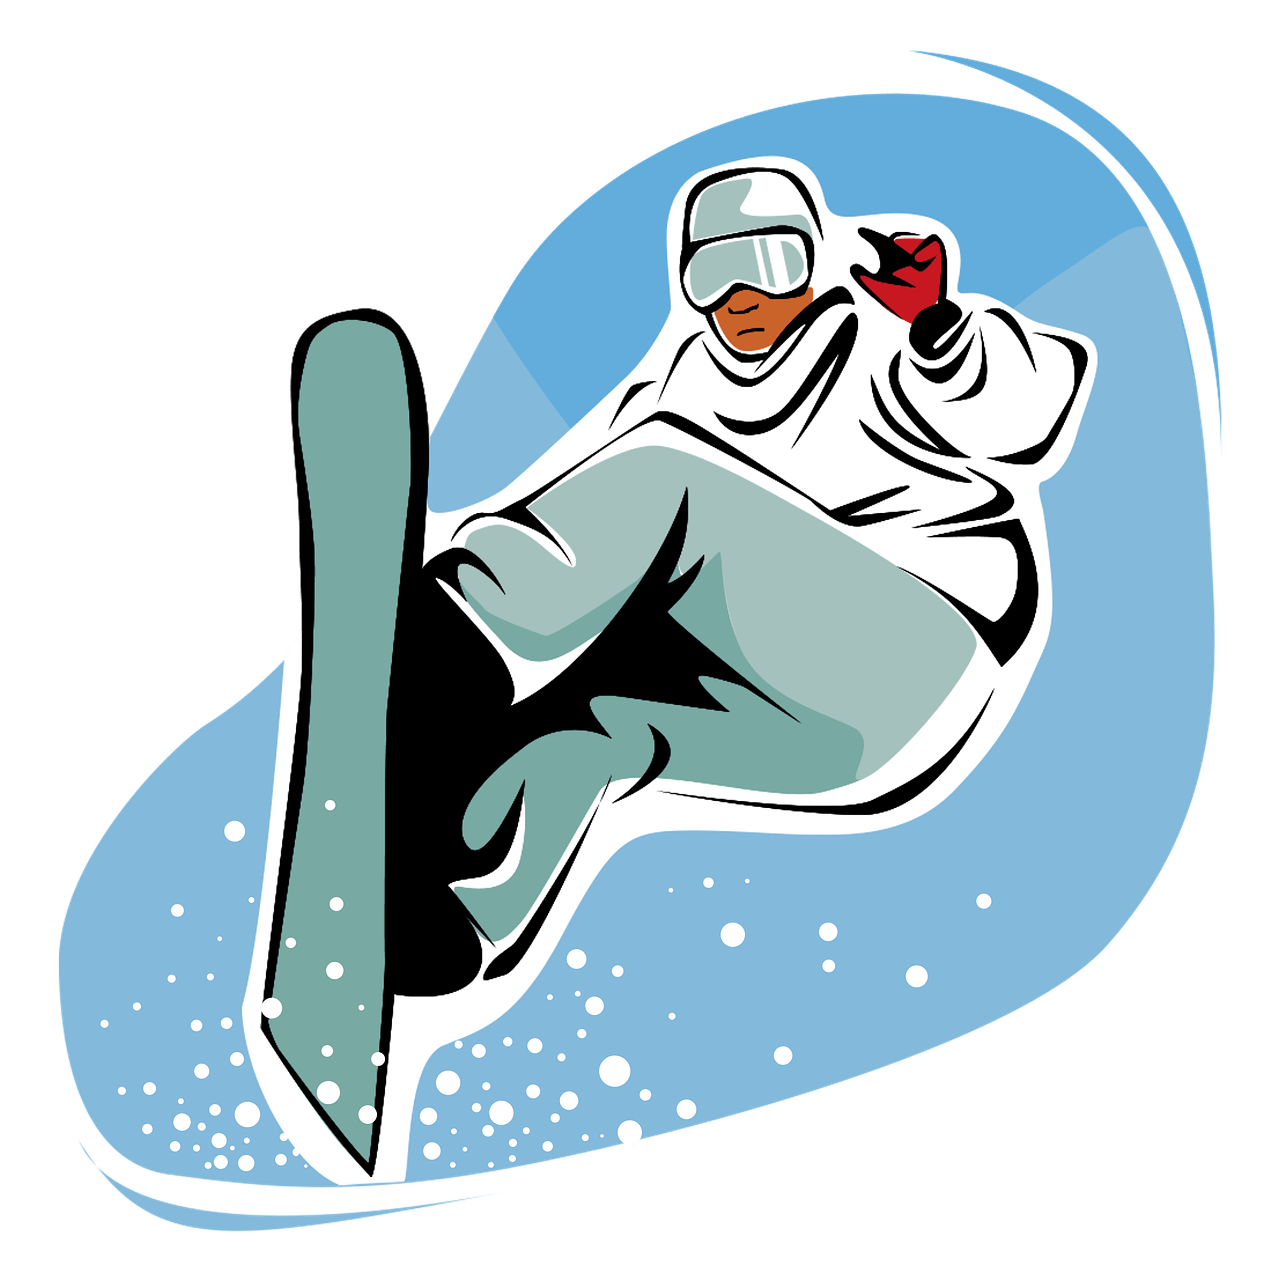 Skis clipart snowboarding. Snowboard png transparent images